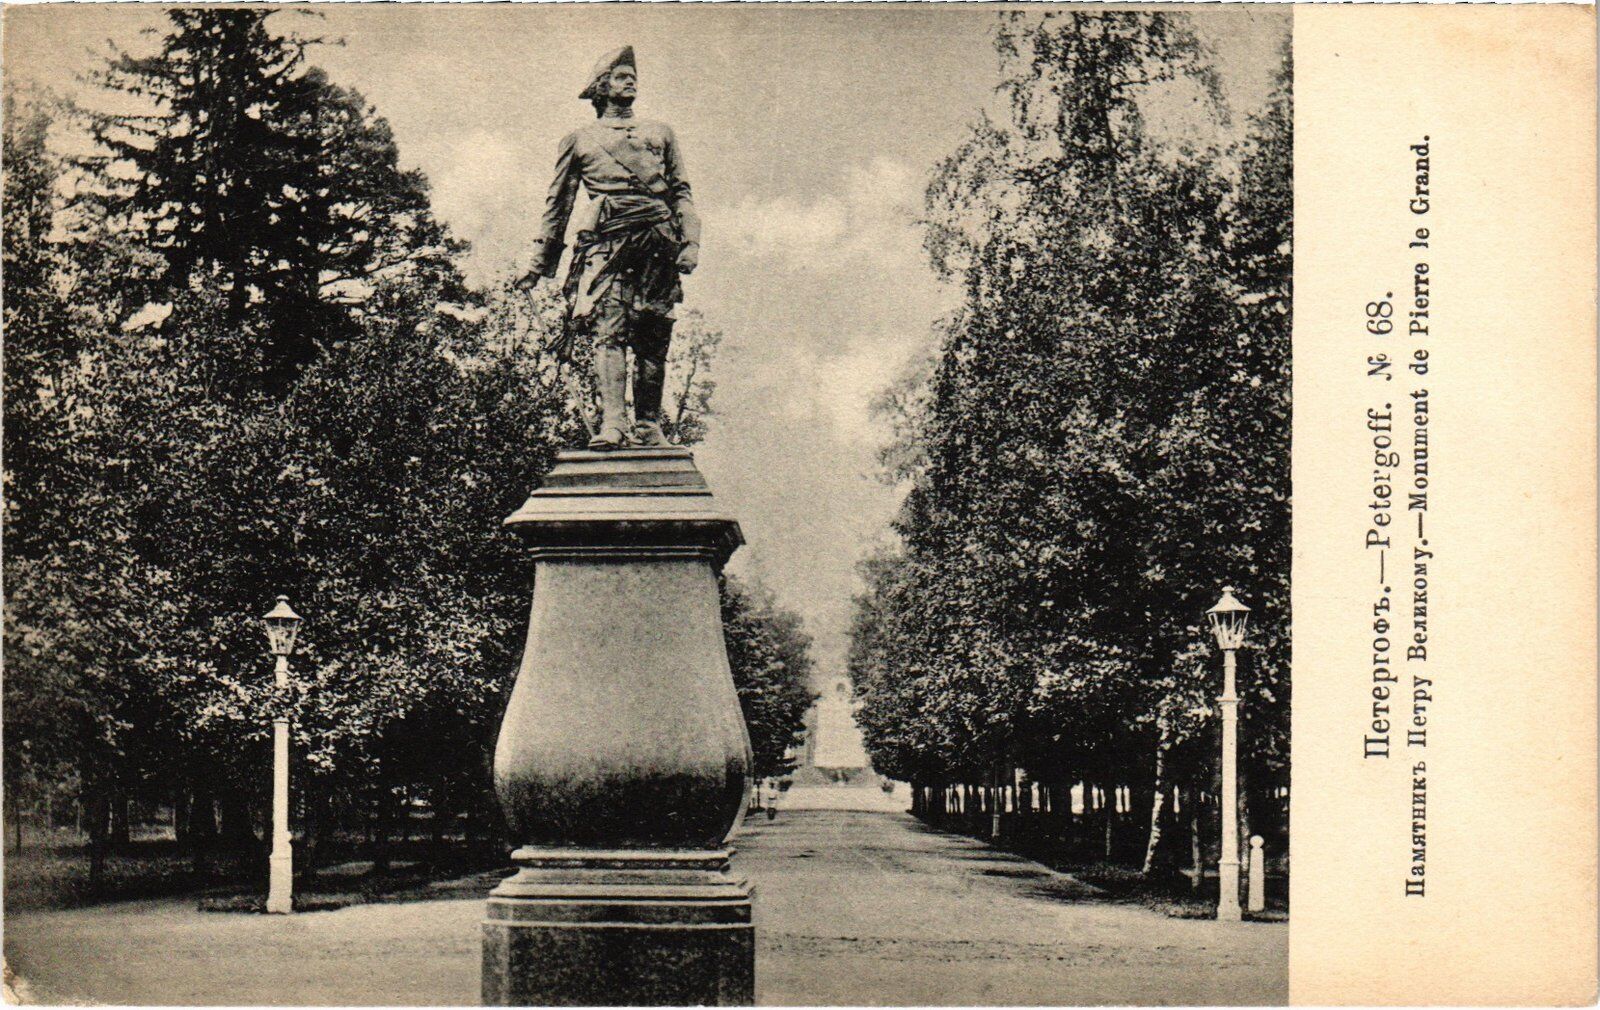 PC RUSSIA PETERGOF ST. PETERSBURG MONUMENT PETER THE GREAT (a47143)